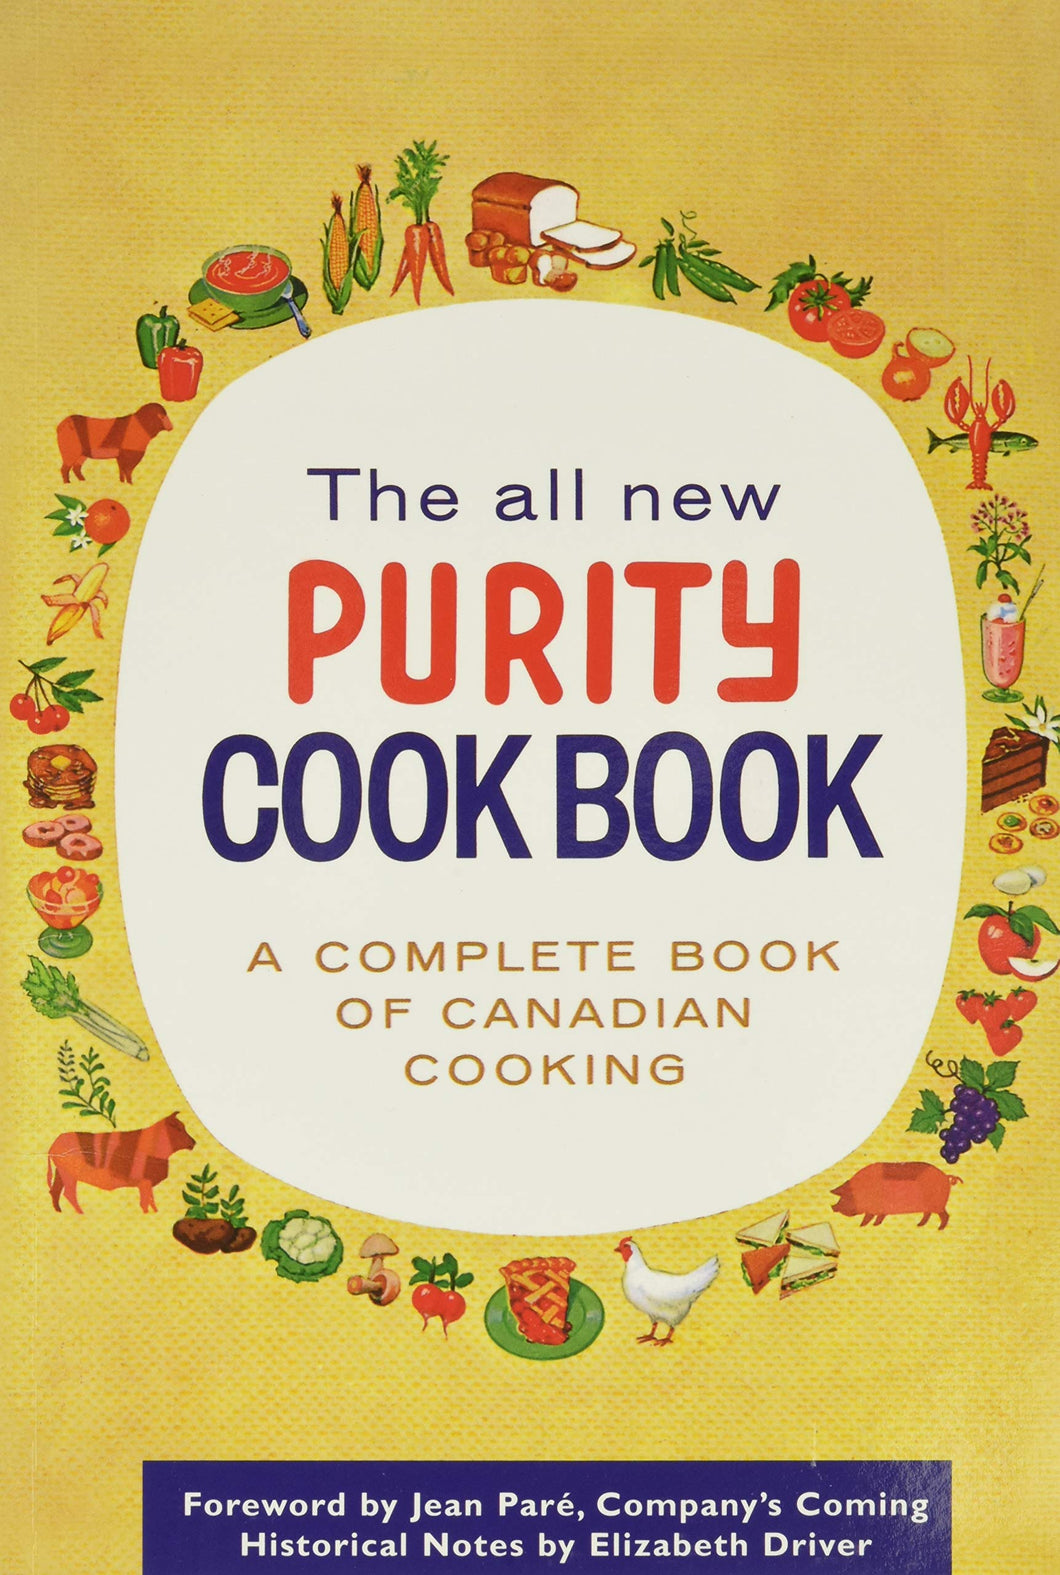 All New Purity Cookbook